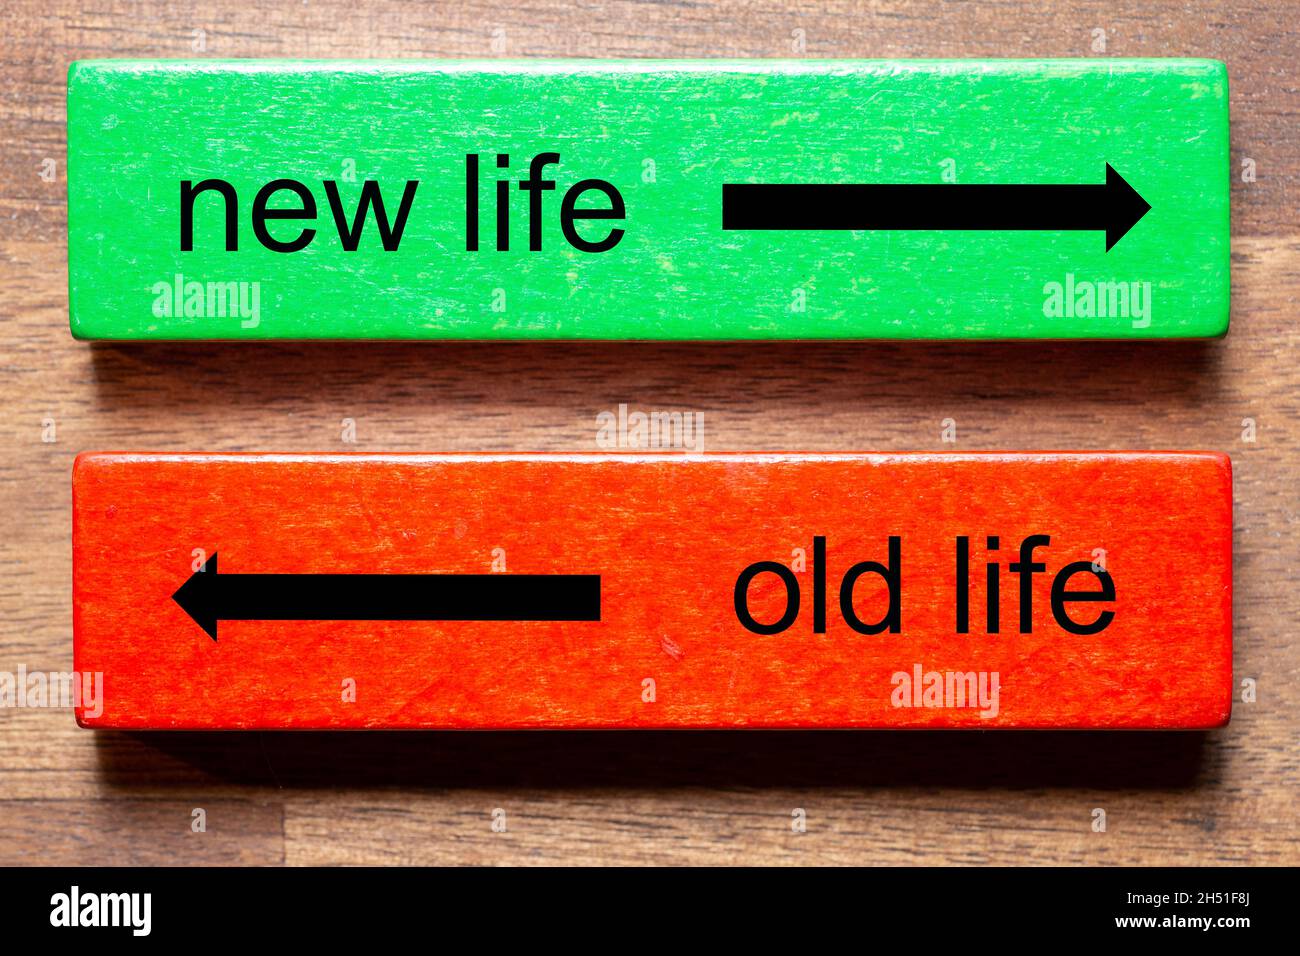 new life is written on a green block and old life is the text on a red block. The background is a dark wood background. Stock Photo